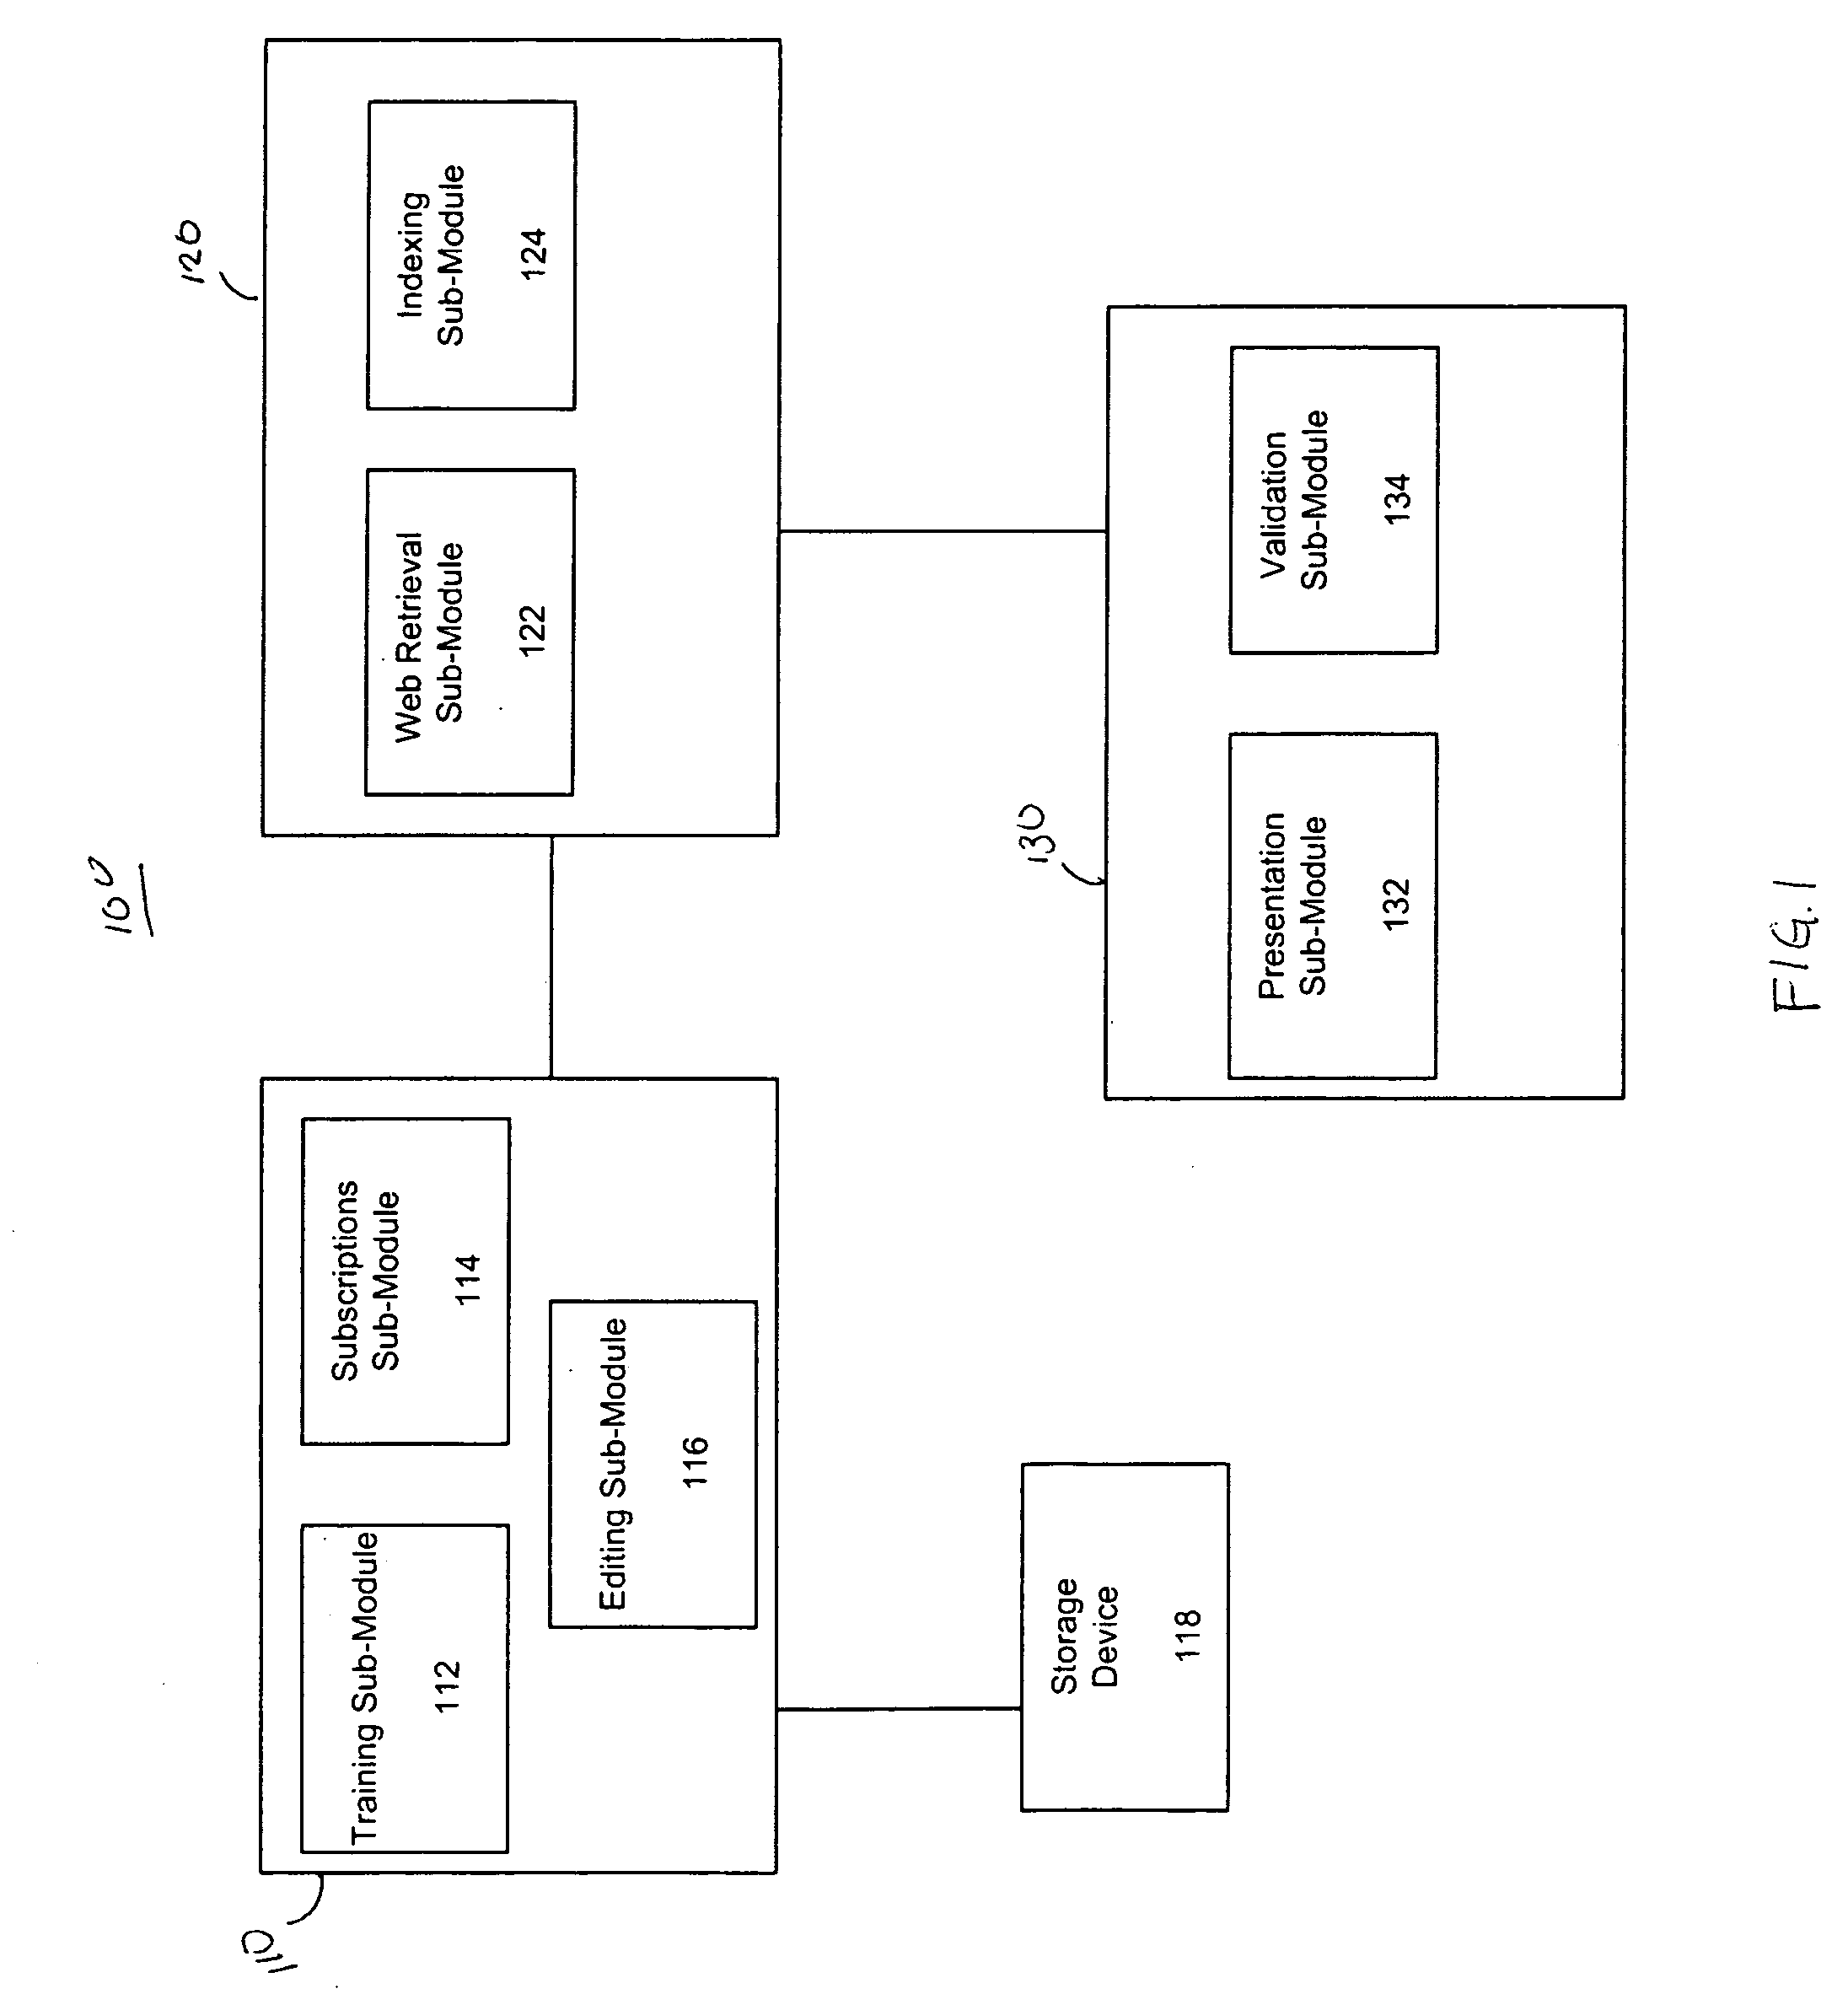 System and method for collecting, processing and presenting selected information from selected sources via a single website